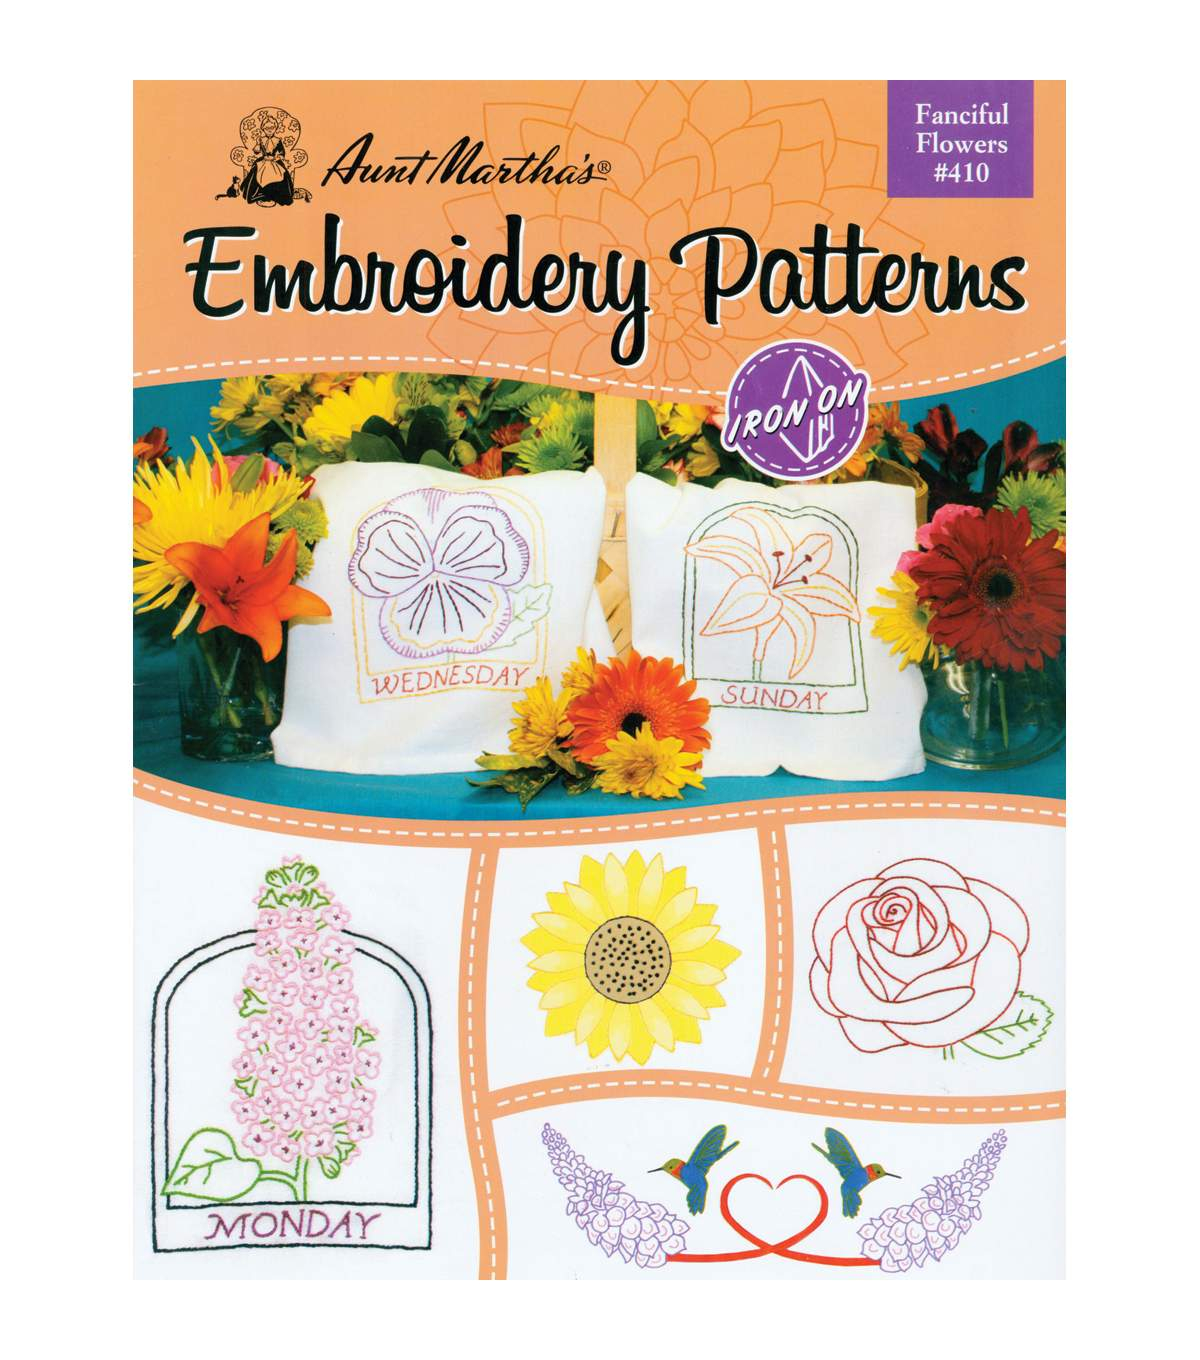 Colonial Embroidery Patterns Aunt Marthas Colonial Patterns Iron On Transfer Books Fanciful Flowers